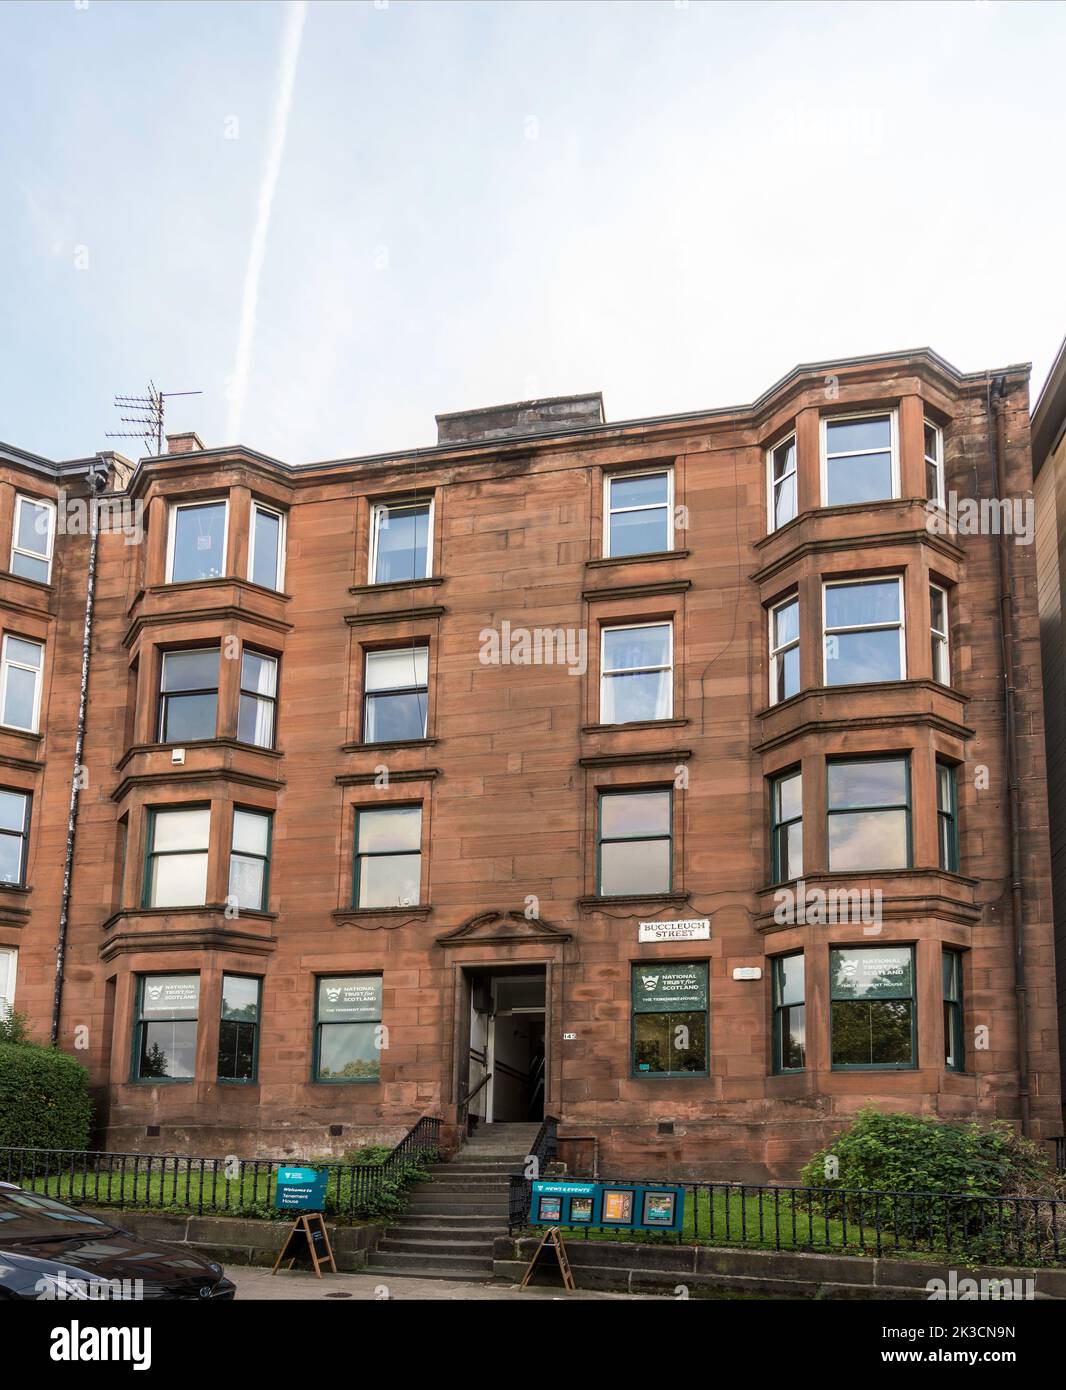 The Tenement House a National Trust for Scotland property at 145 Buccleuch St, Glasgow, Scotland, UK Stock Photo